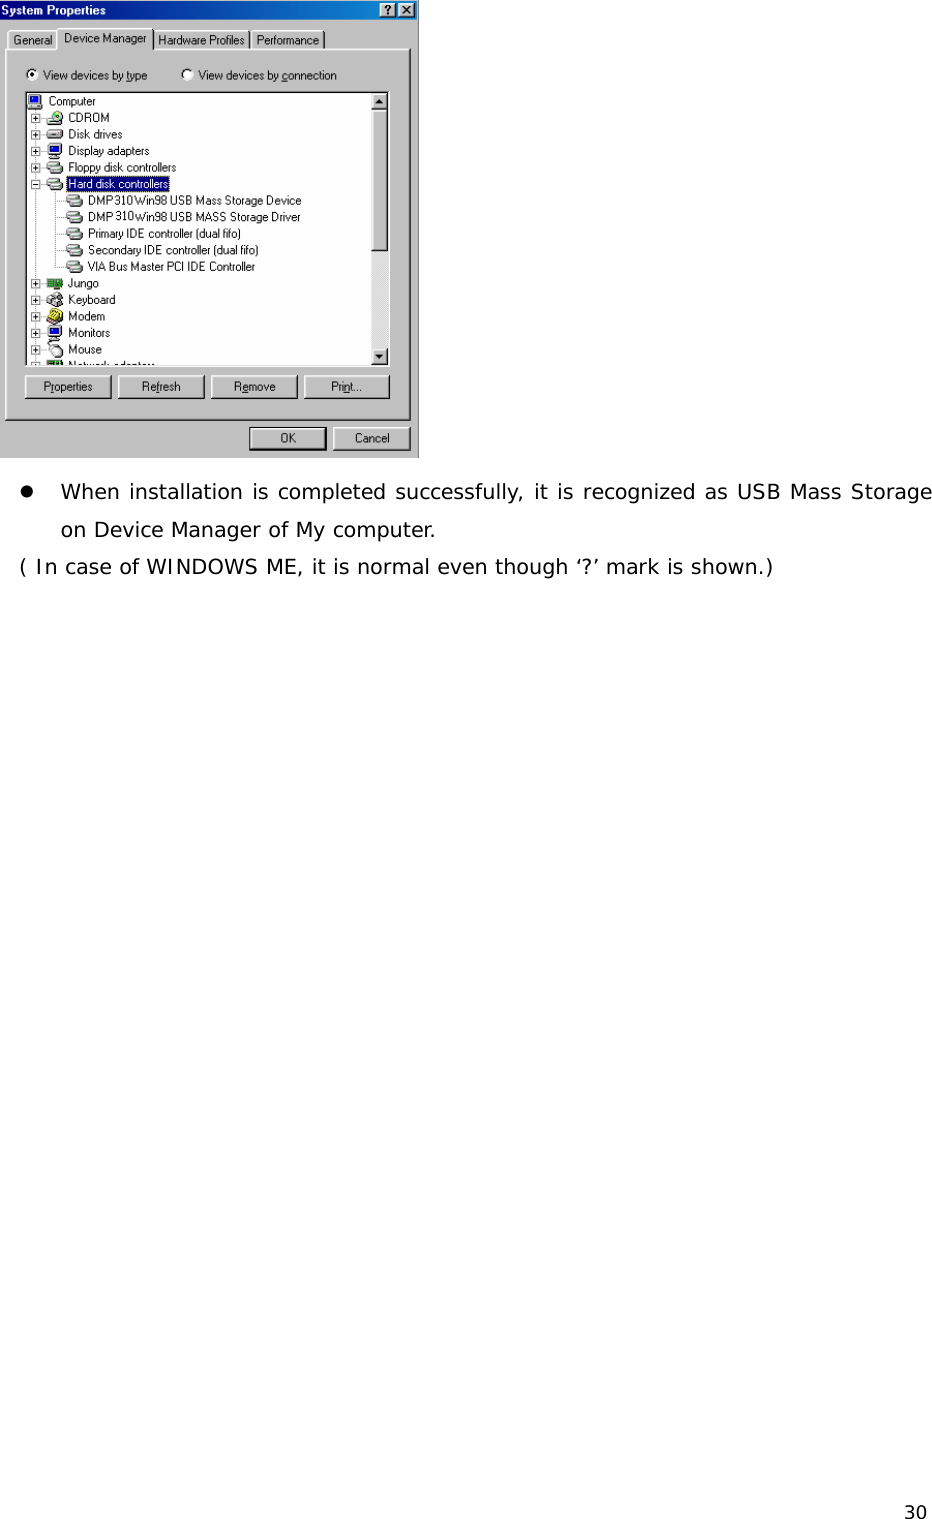 30  z When installation is completed successfully, it is recognized as USB Mass Storage on Device Manager of My computer.  ( In case of WINDOWS ME, it is normal even though ‘?’ mark is shown.)                        